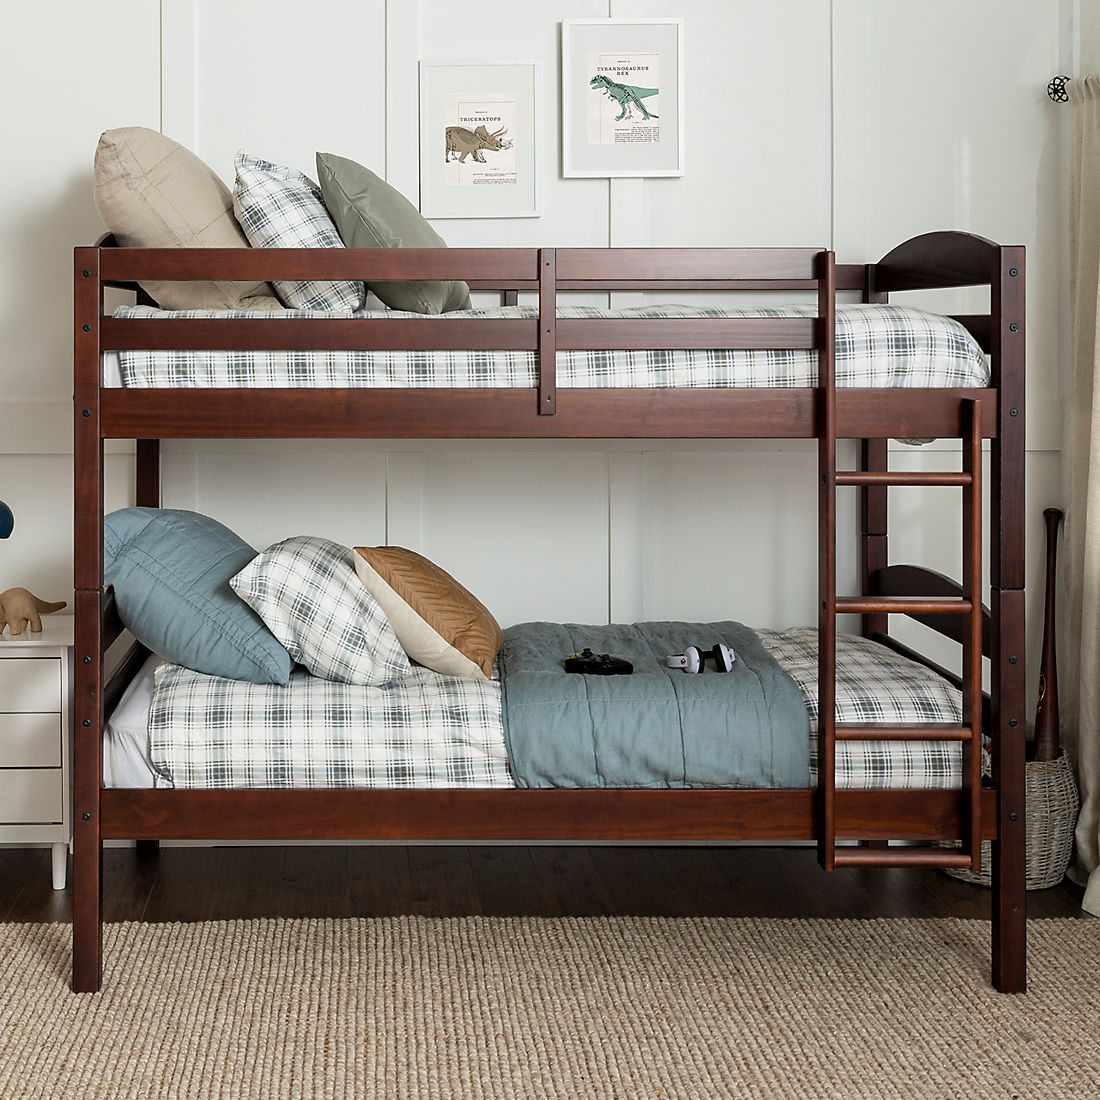 W Trends Twin Size Solid Wood Bunk Bed, Berkley Jensen Twin Size Bunk Bed With Trundle Instructions